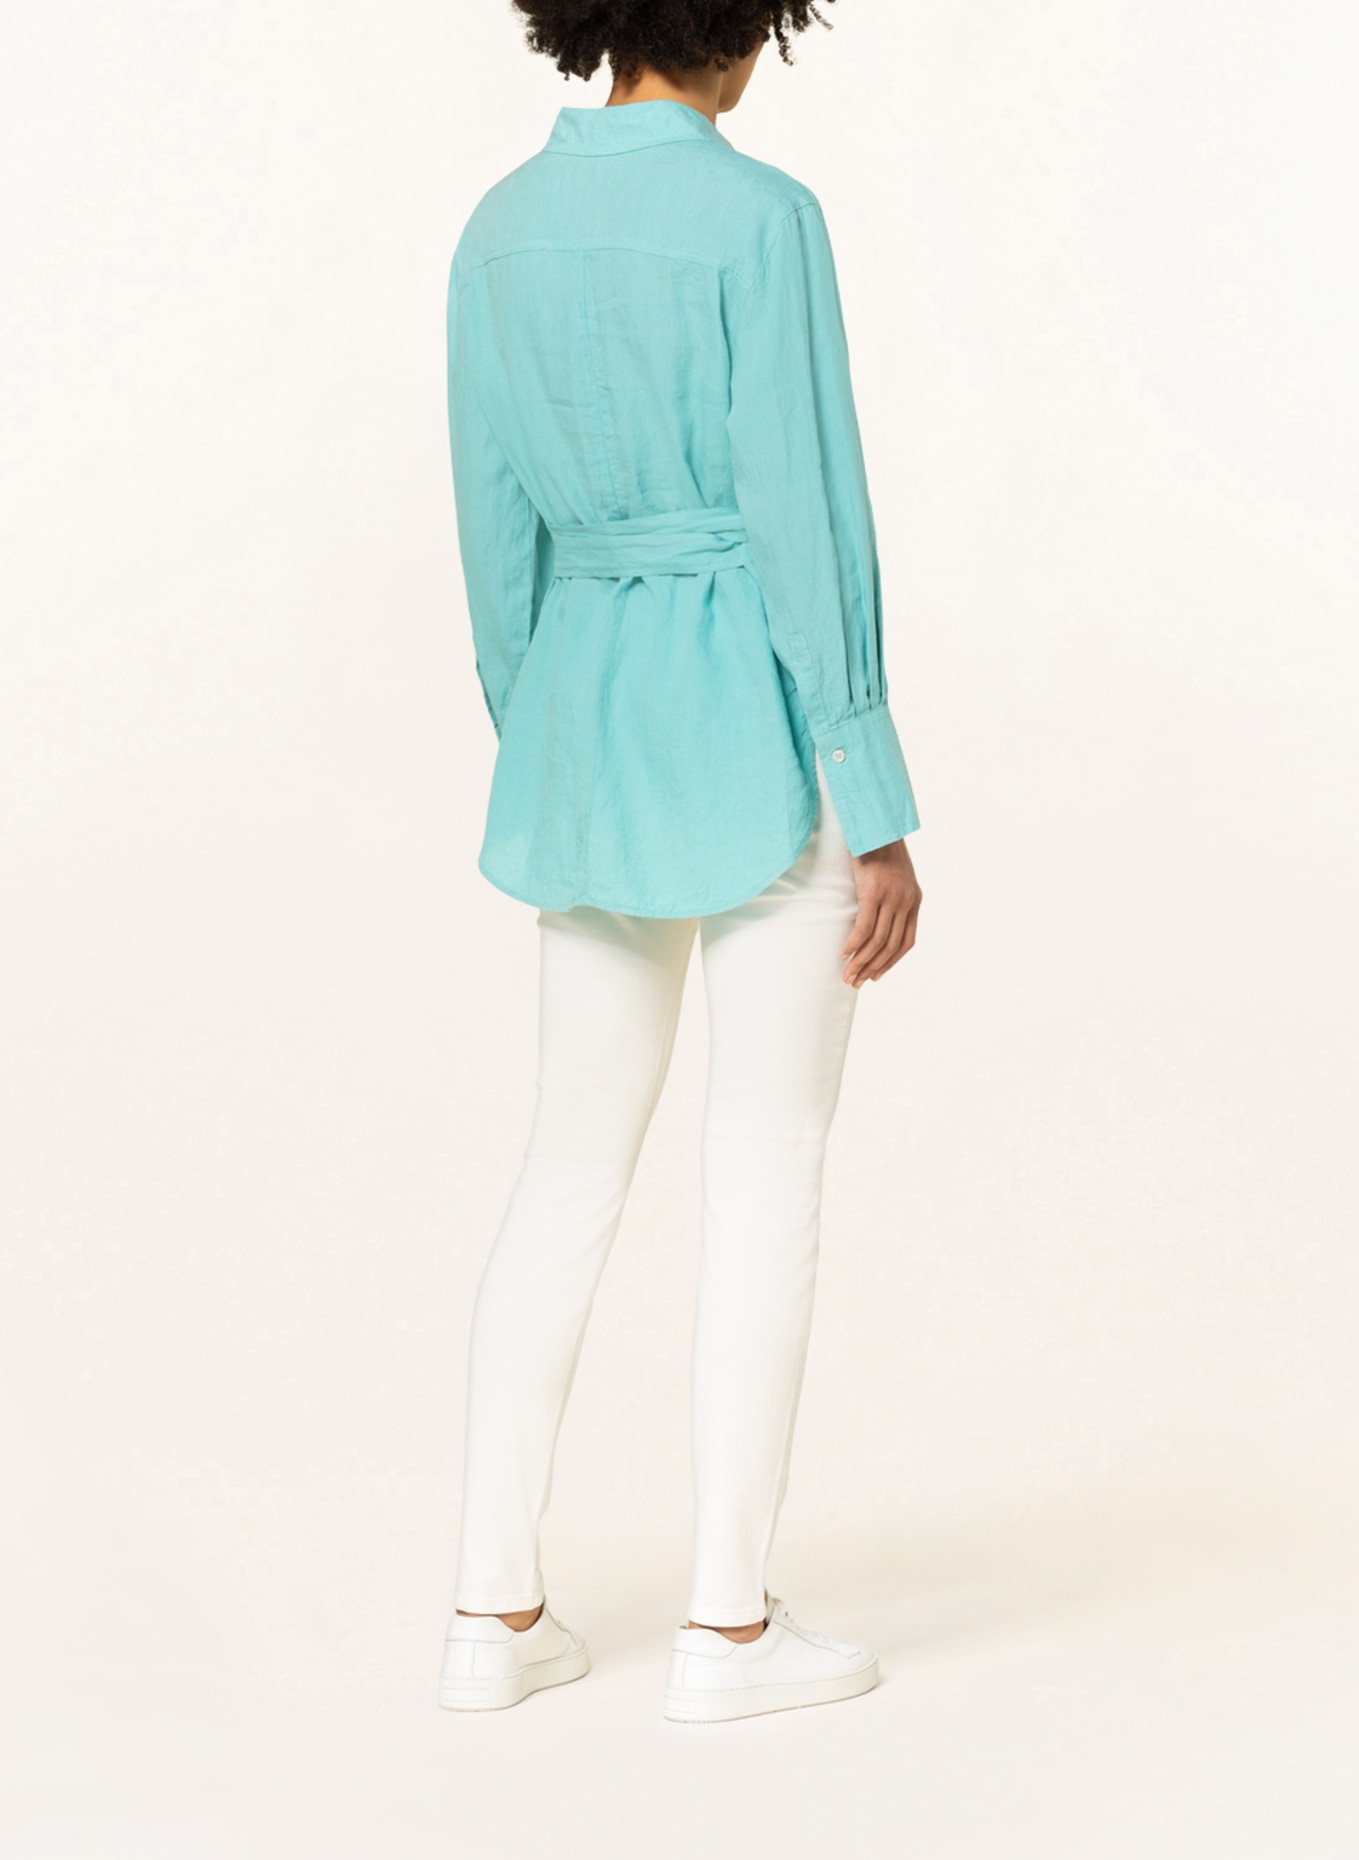 Marc O'Polo Shirt blouse made of linen , Color: TURQUOISE (Image 3)